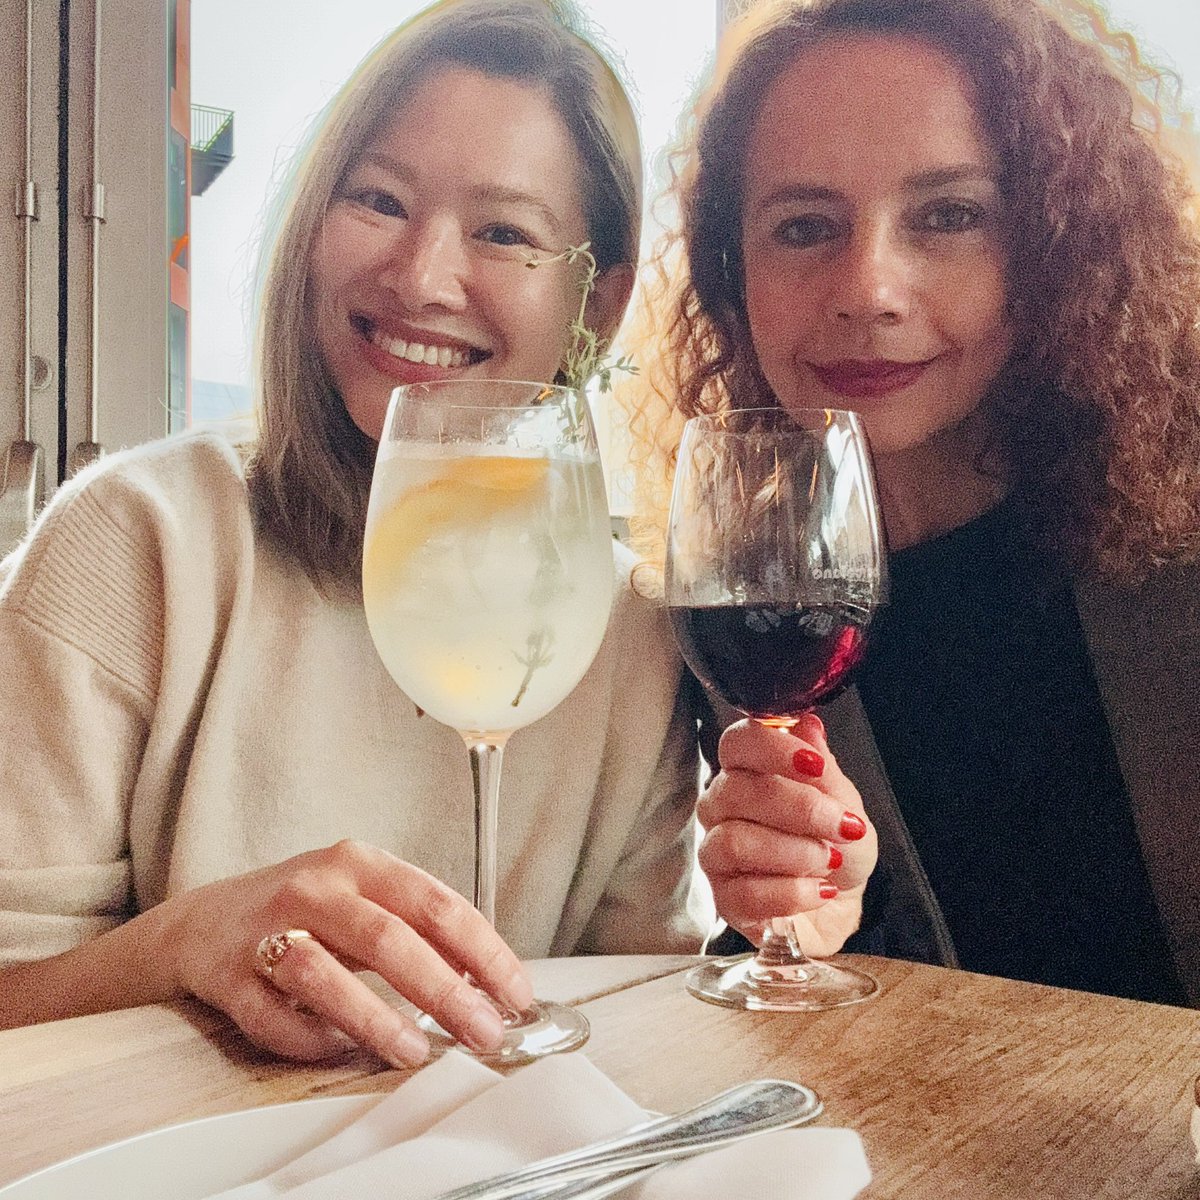 The most beautiful reunion with international politics and conflict scholar (@DelDemUCan’s associate!) @Tamyfakhoury 😍 Tamy joined the Fletcher School at @TuftsUniversity this spring and she already knows the best vino & gin spots in #Boston ♥️